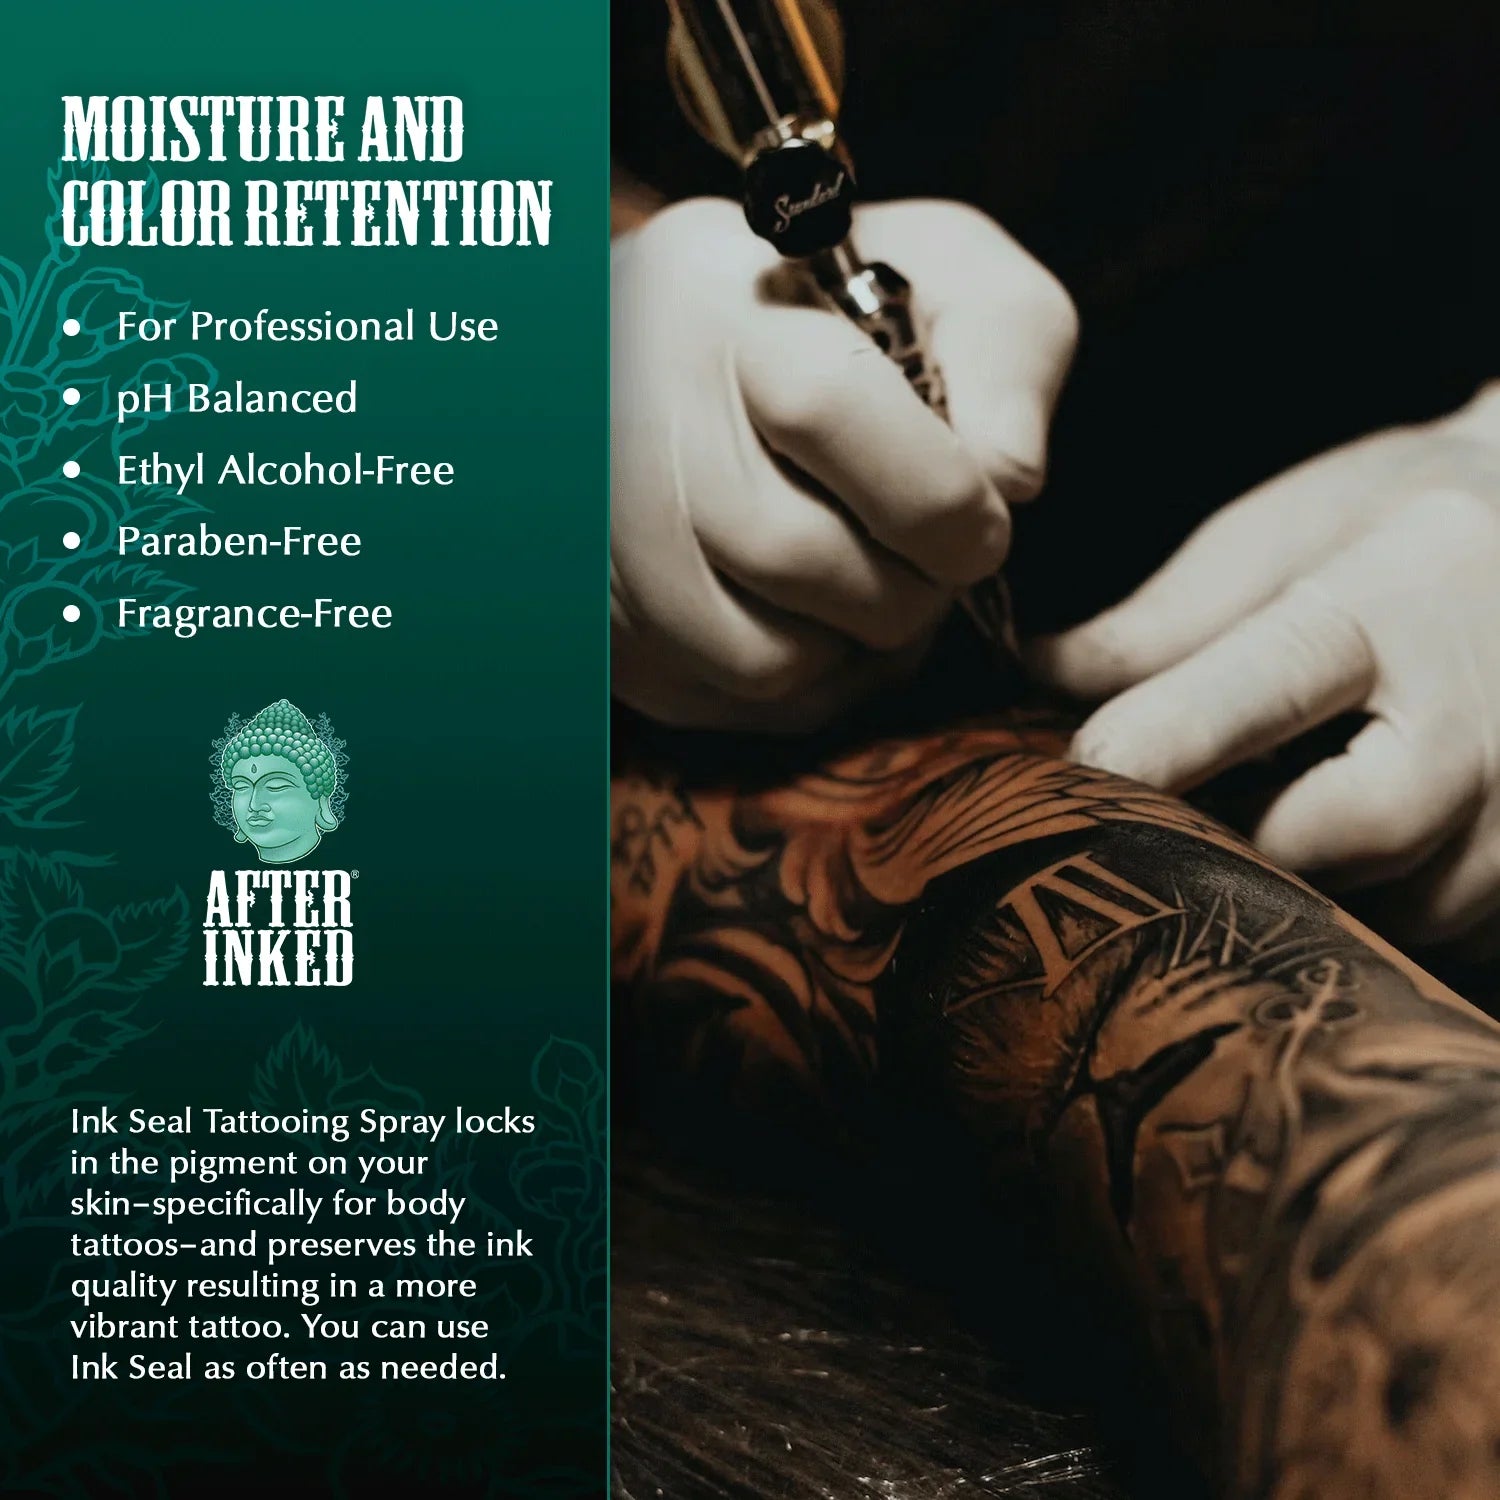 After Inked Ink Seal Tattoo Spray 4 oz front ingredients